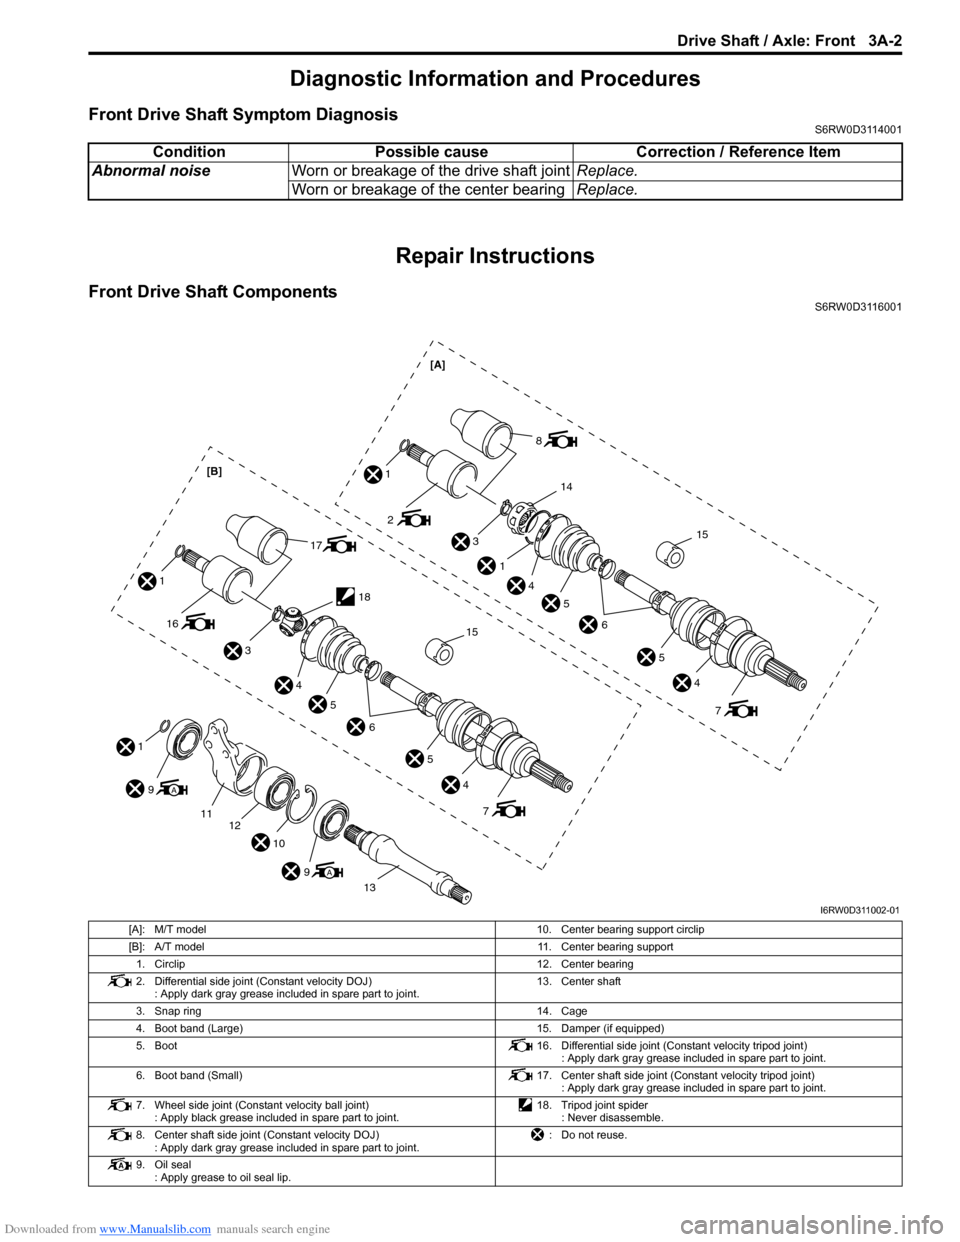 SUZUKI SX4 2006 1.G Service Workshop Manual Downloaded from www.Manualslib.com manuals search engine Drive Shaft / Axle: Front 3A-2
Diagnostic Information and Procedures
Front Drive Shaft Symptom DiagnosisS6RW0D3114001
Repair Instructions
Front